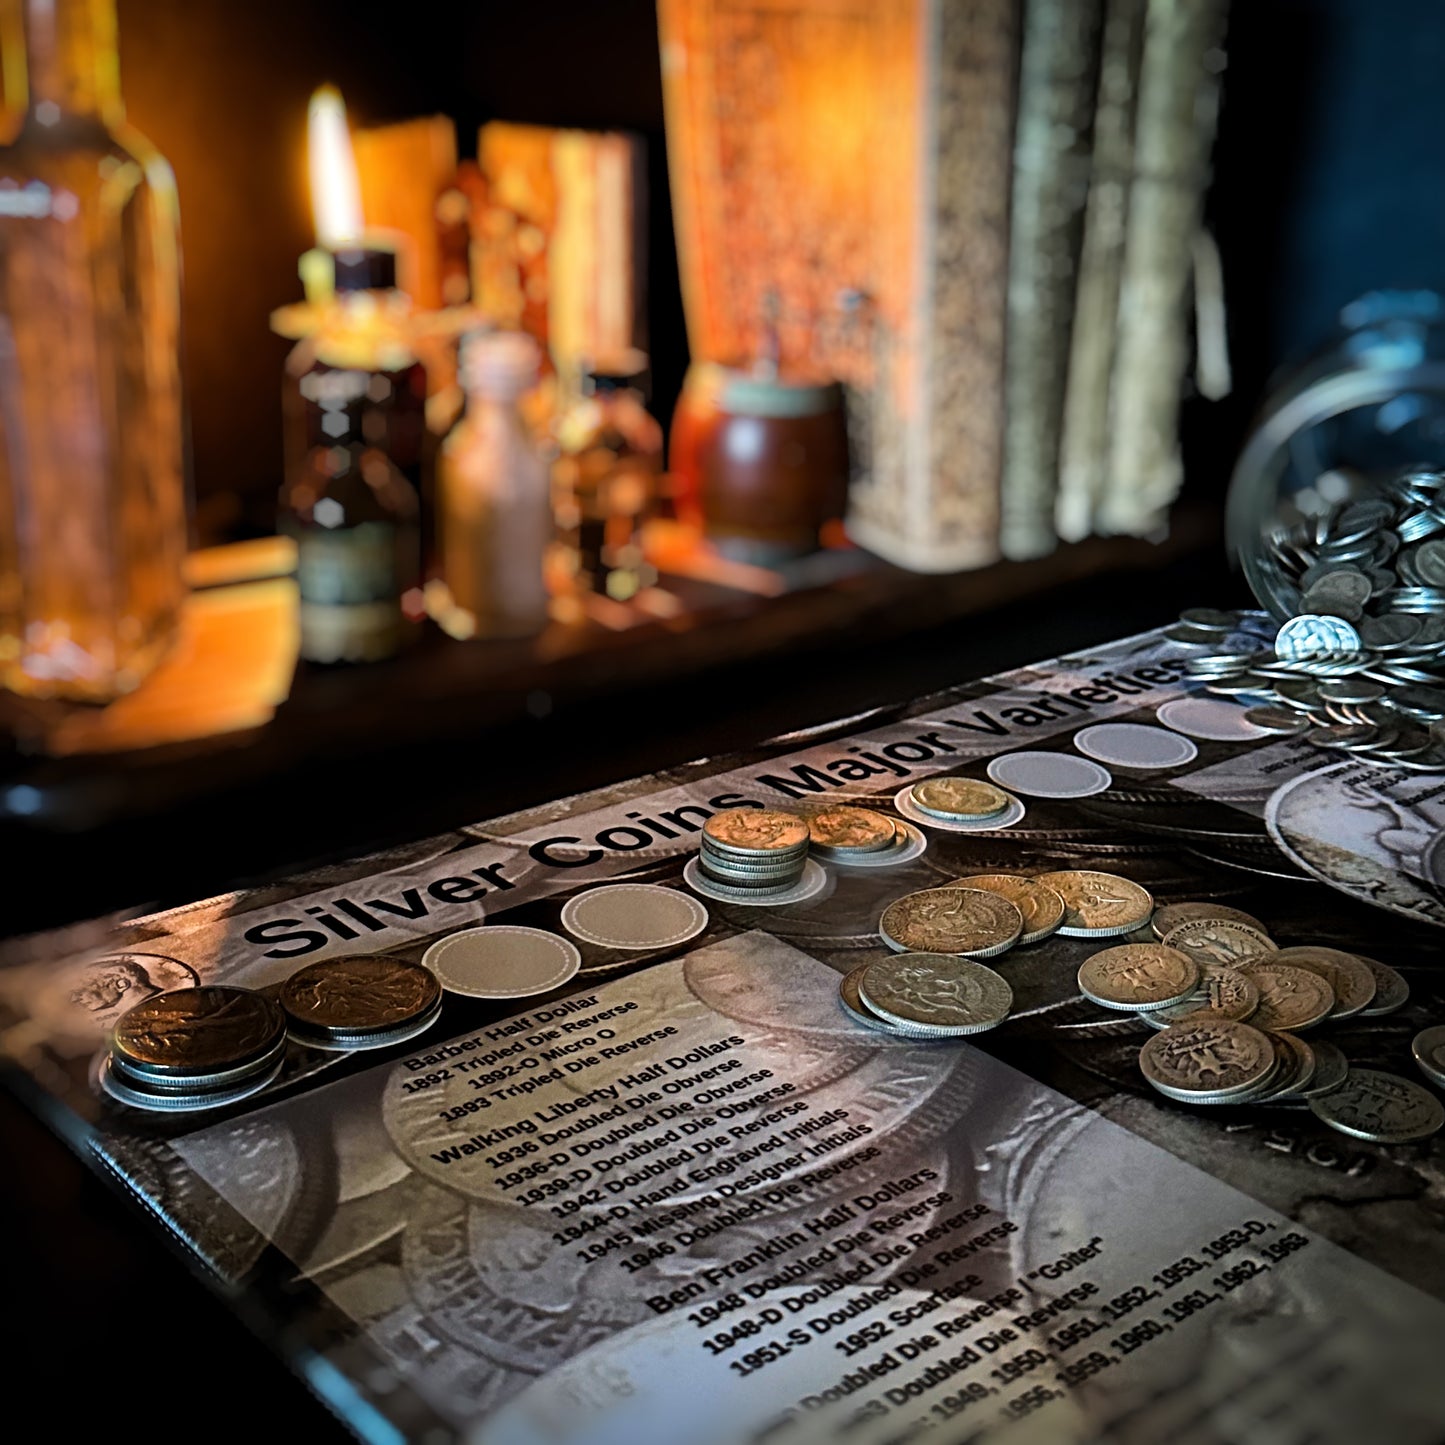 Close up of a layout with coins of a Silver Coin Hunting Mat for major Varieties made by Rob Finds Treasure featuring organized rows for stacking silver major variety finds, providing a convenient and systematic setup for searching through coins